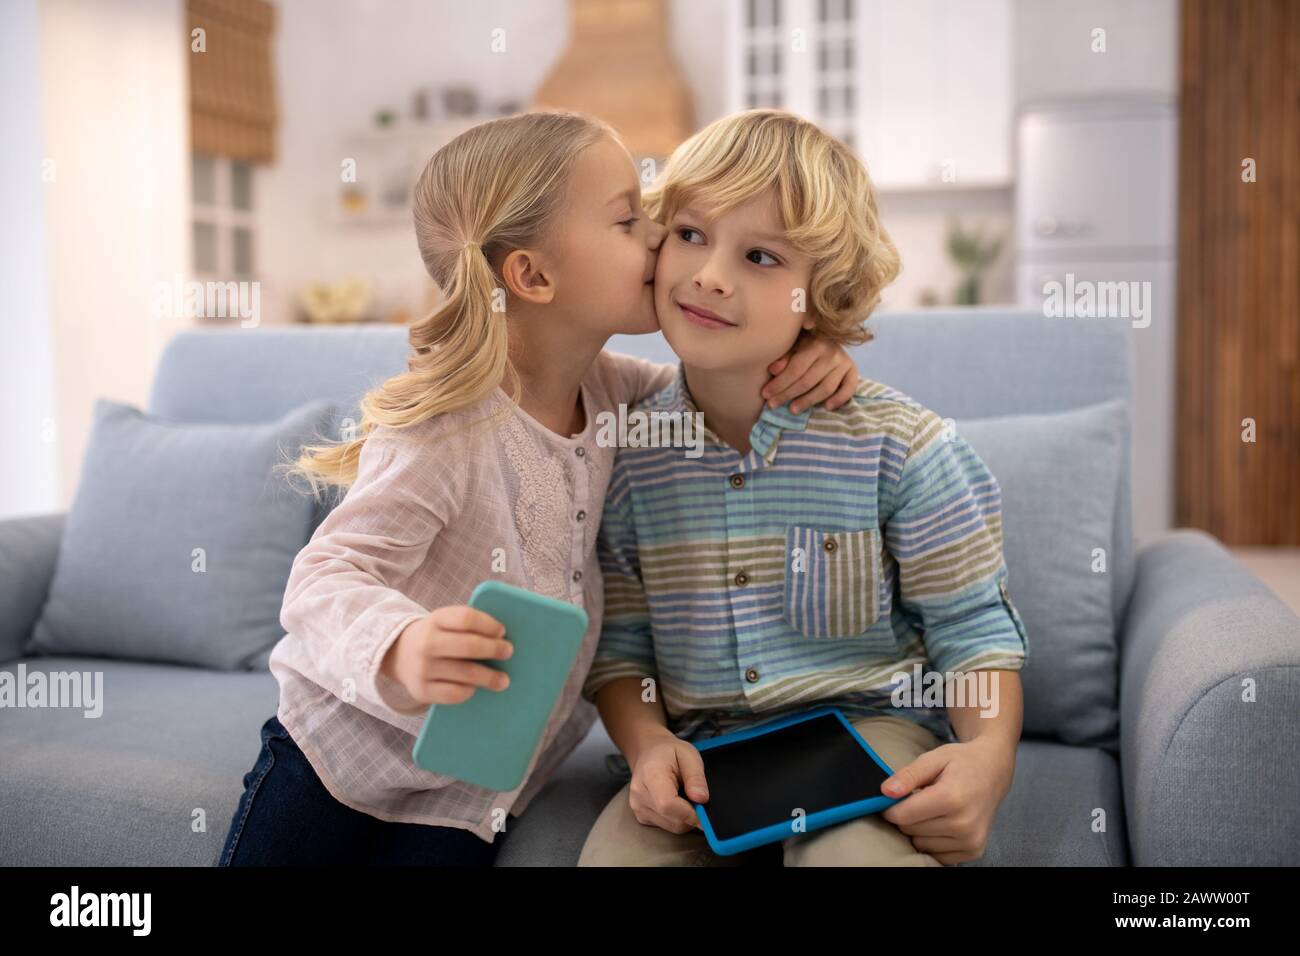 Girl kissing and embracing boy, both are happy Stock Photo